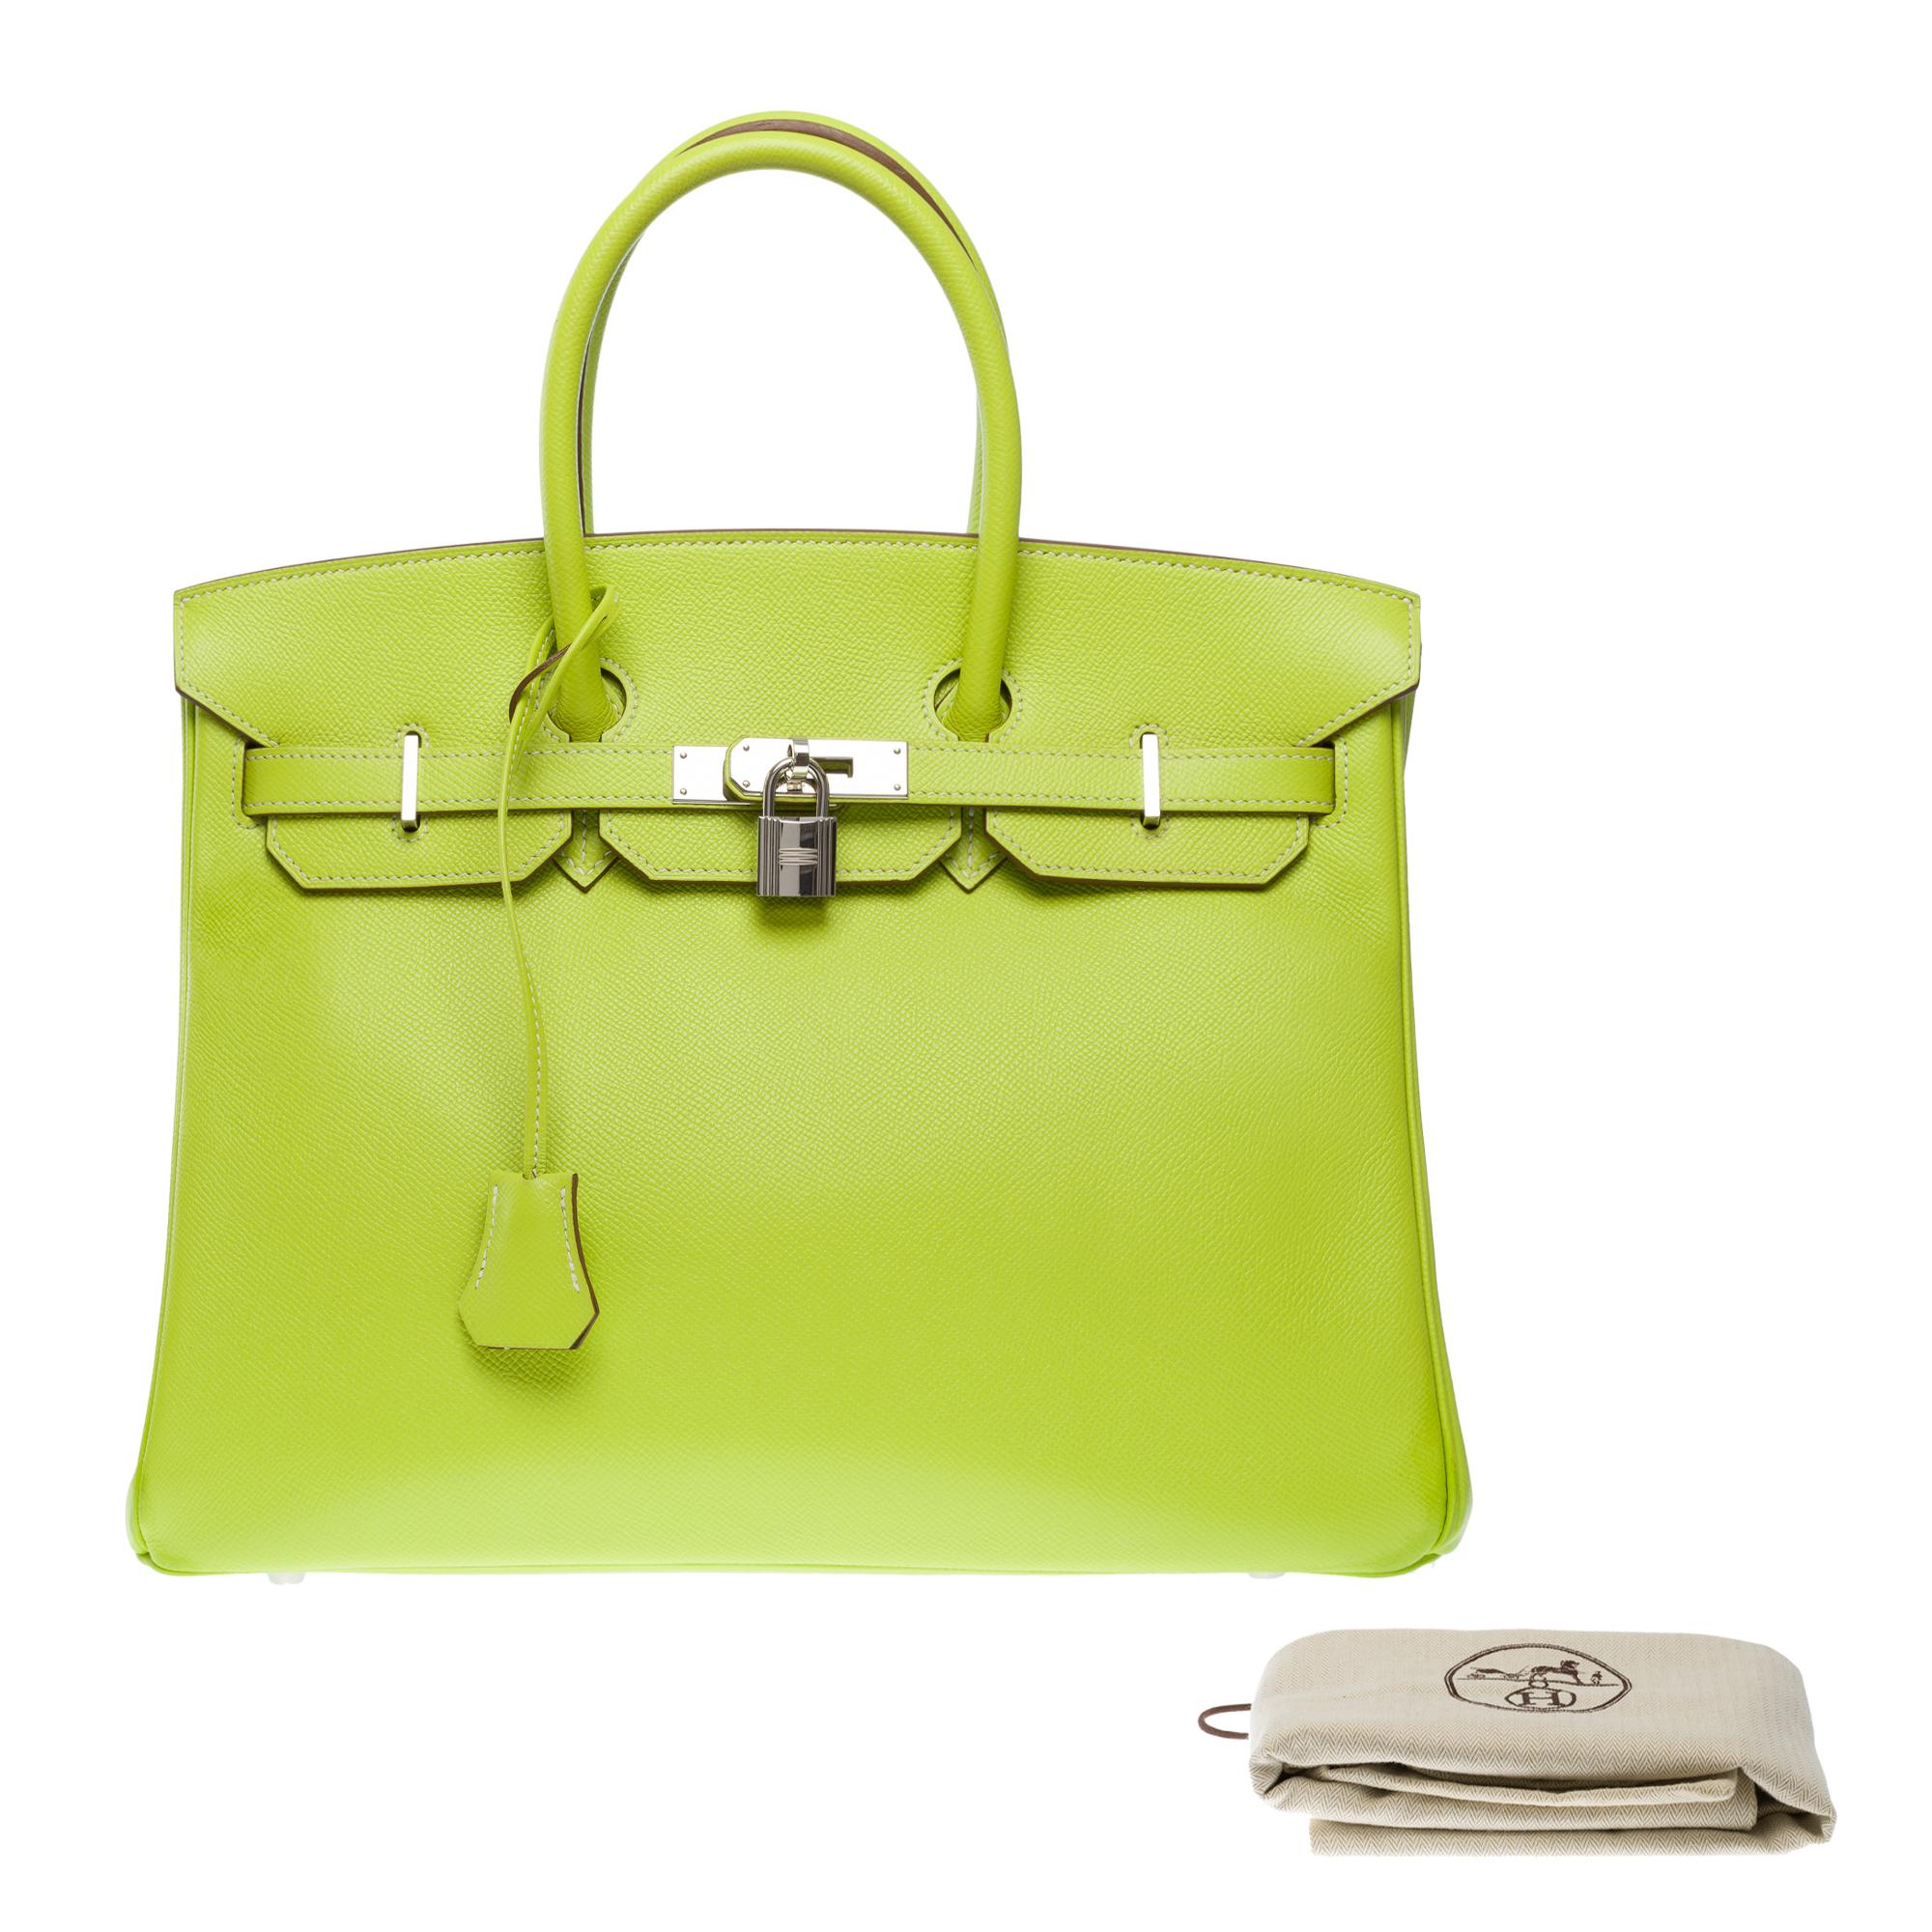 Exceptional & Rare Hermes Birkin 35 limited edition of the Candy Collection in Kiwi Green Epsom leather with the interior in 